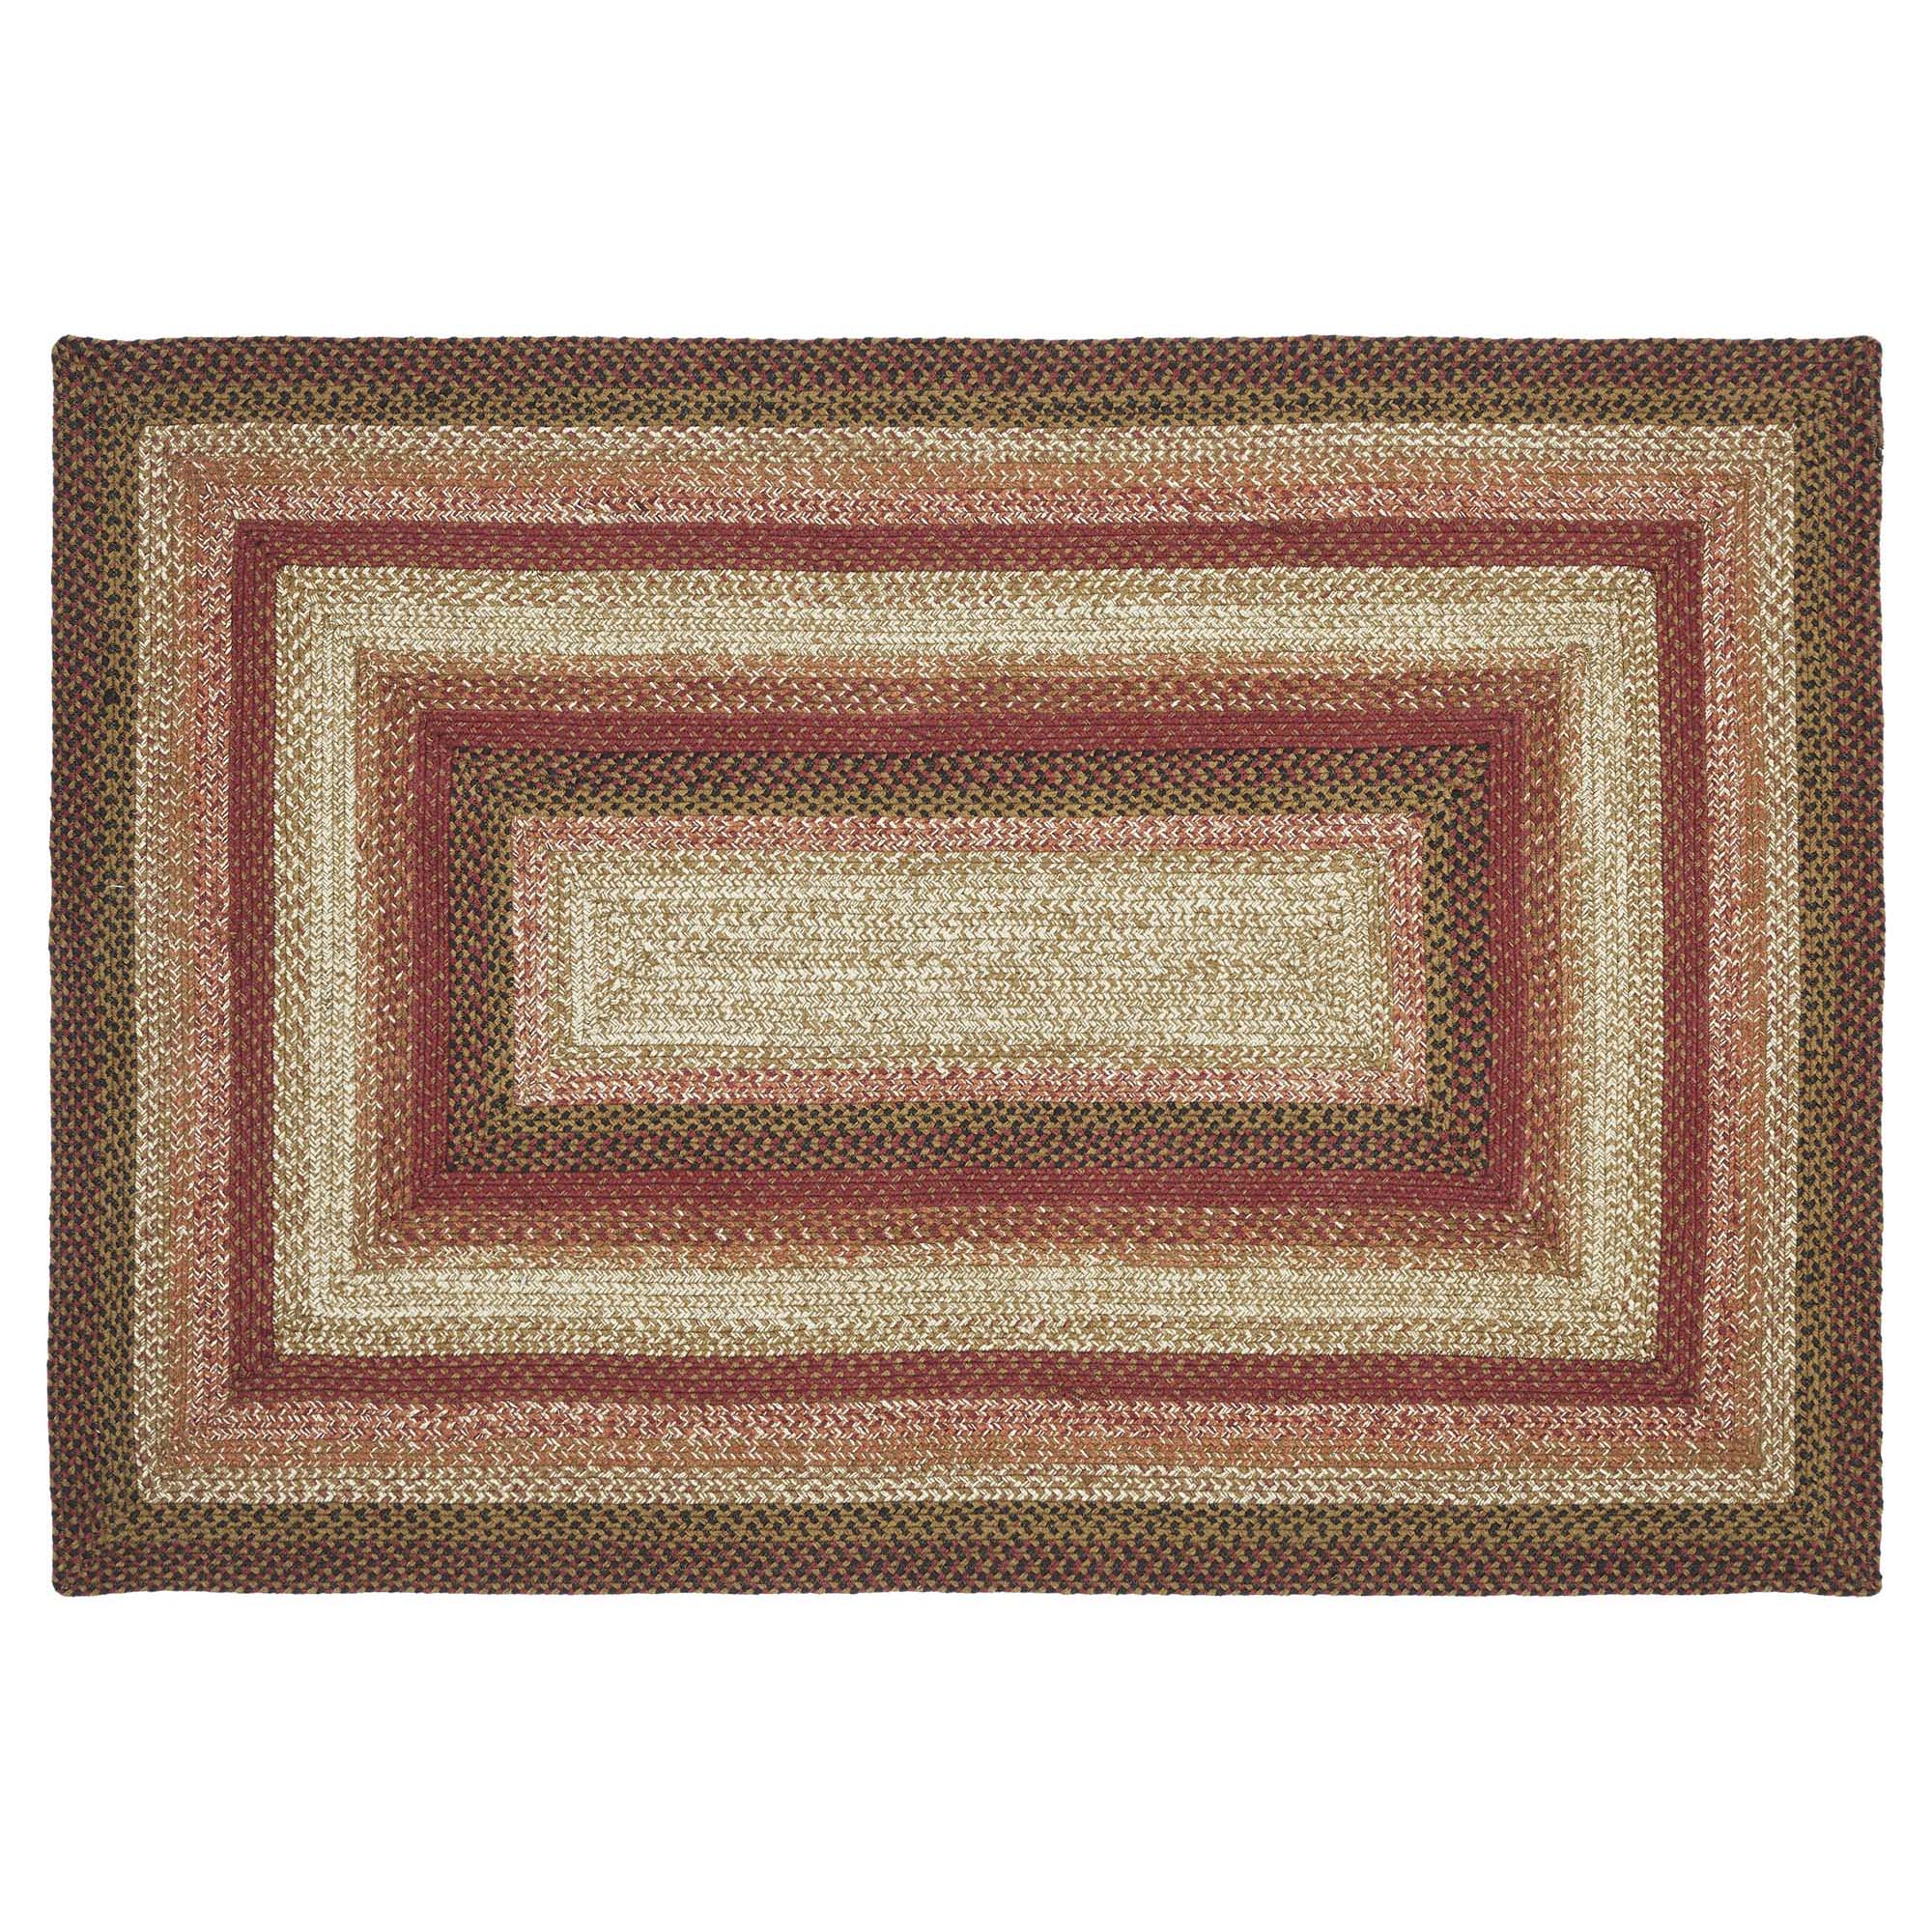 Ginger Spice Jute Braided Rug Rect with Rug Pad 4'x6' VHC Brands